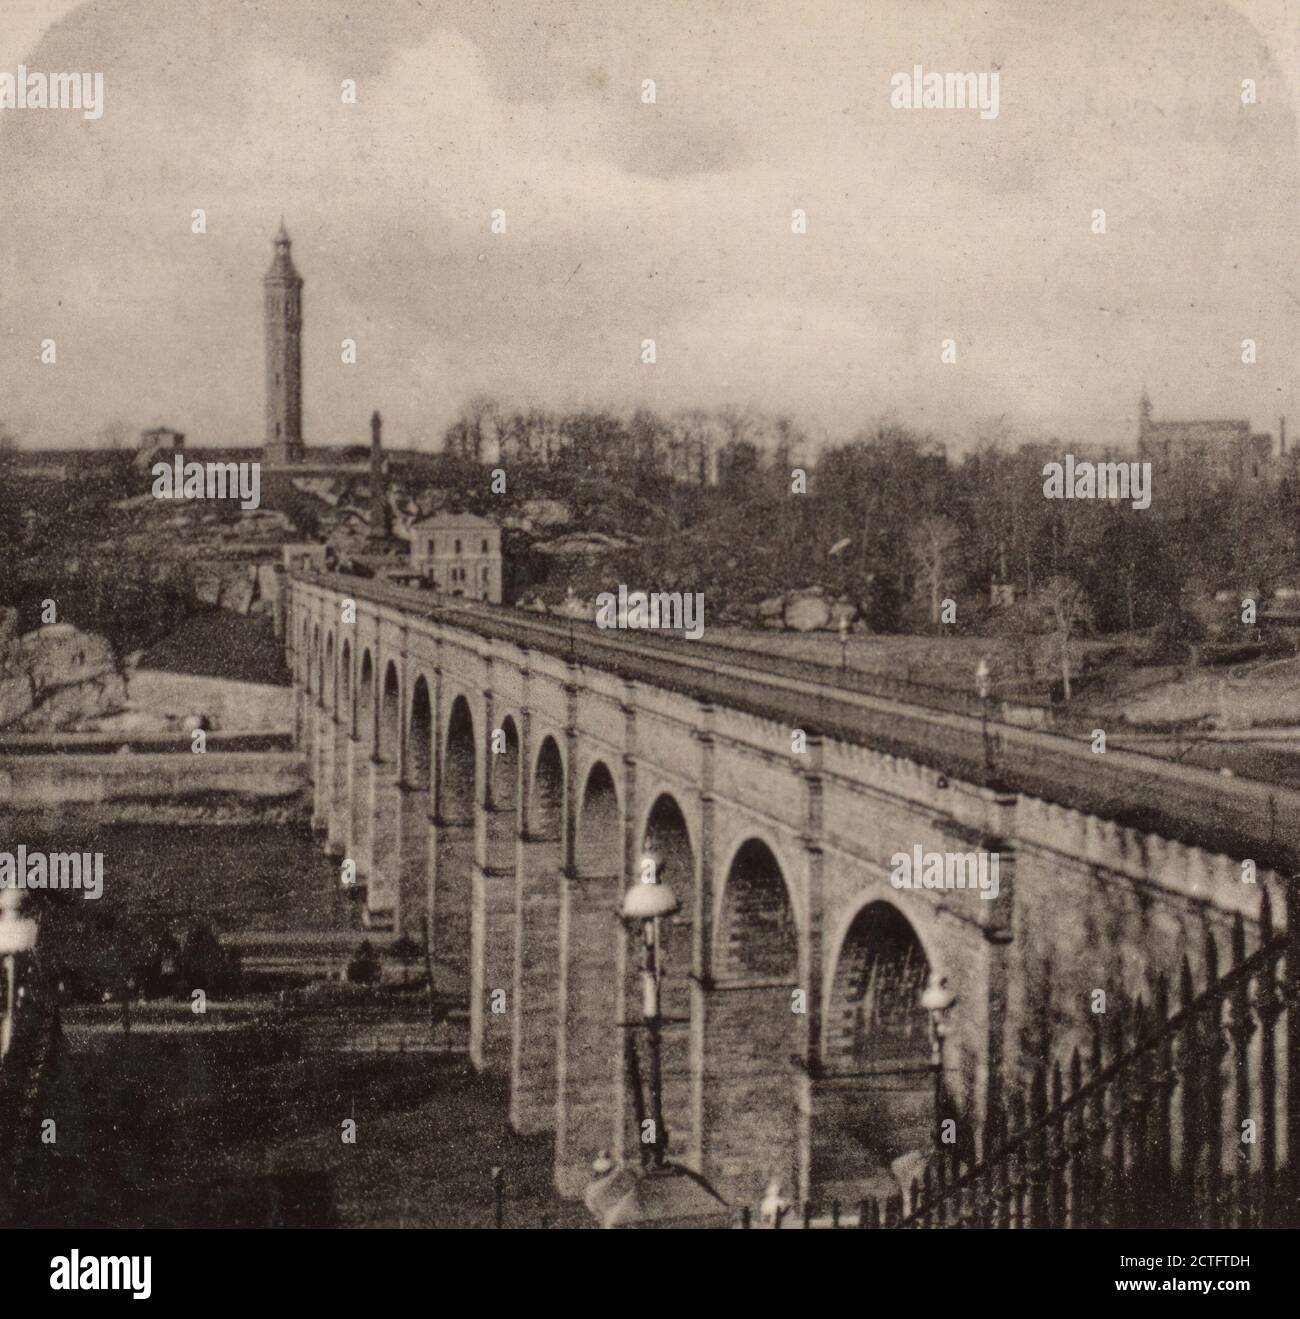 High Bridge (Croton Aqueduct), across Harlem River, from the East., 1900, New York (State), New York (N.Y.), New York, High Bridge (New York, N.Y Stock Photo